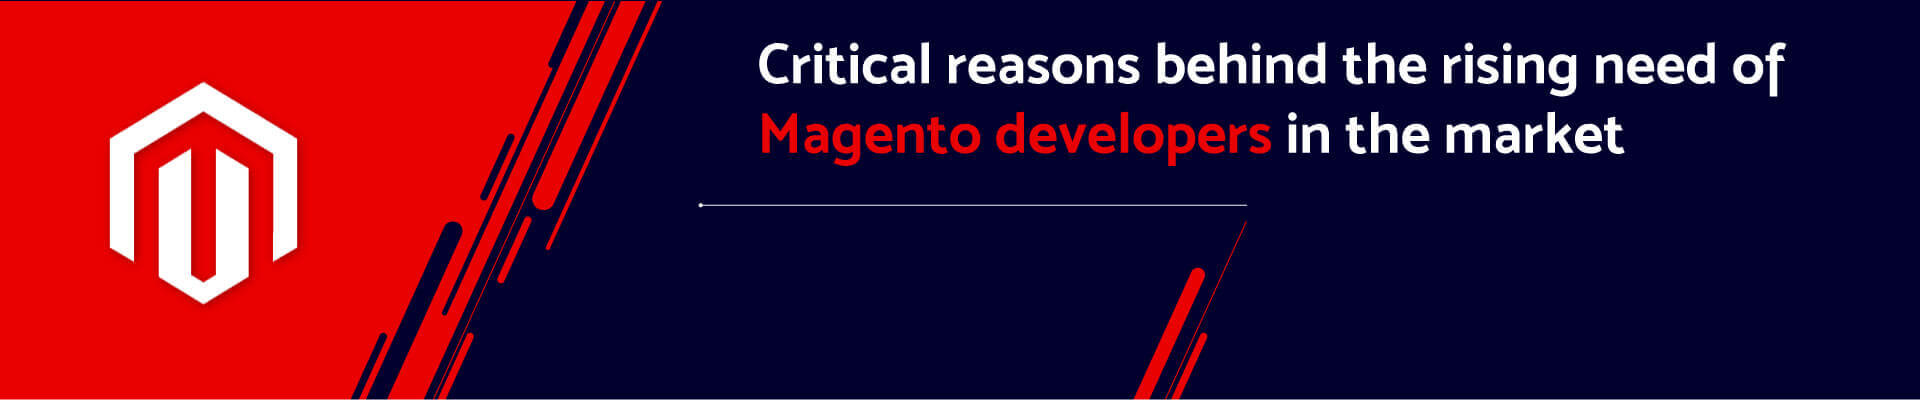 Critical-reasons-behind-the-rising-need-of-Magento-developers-in-the-market